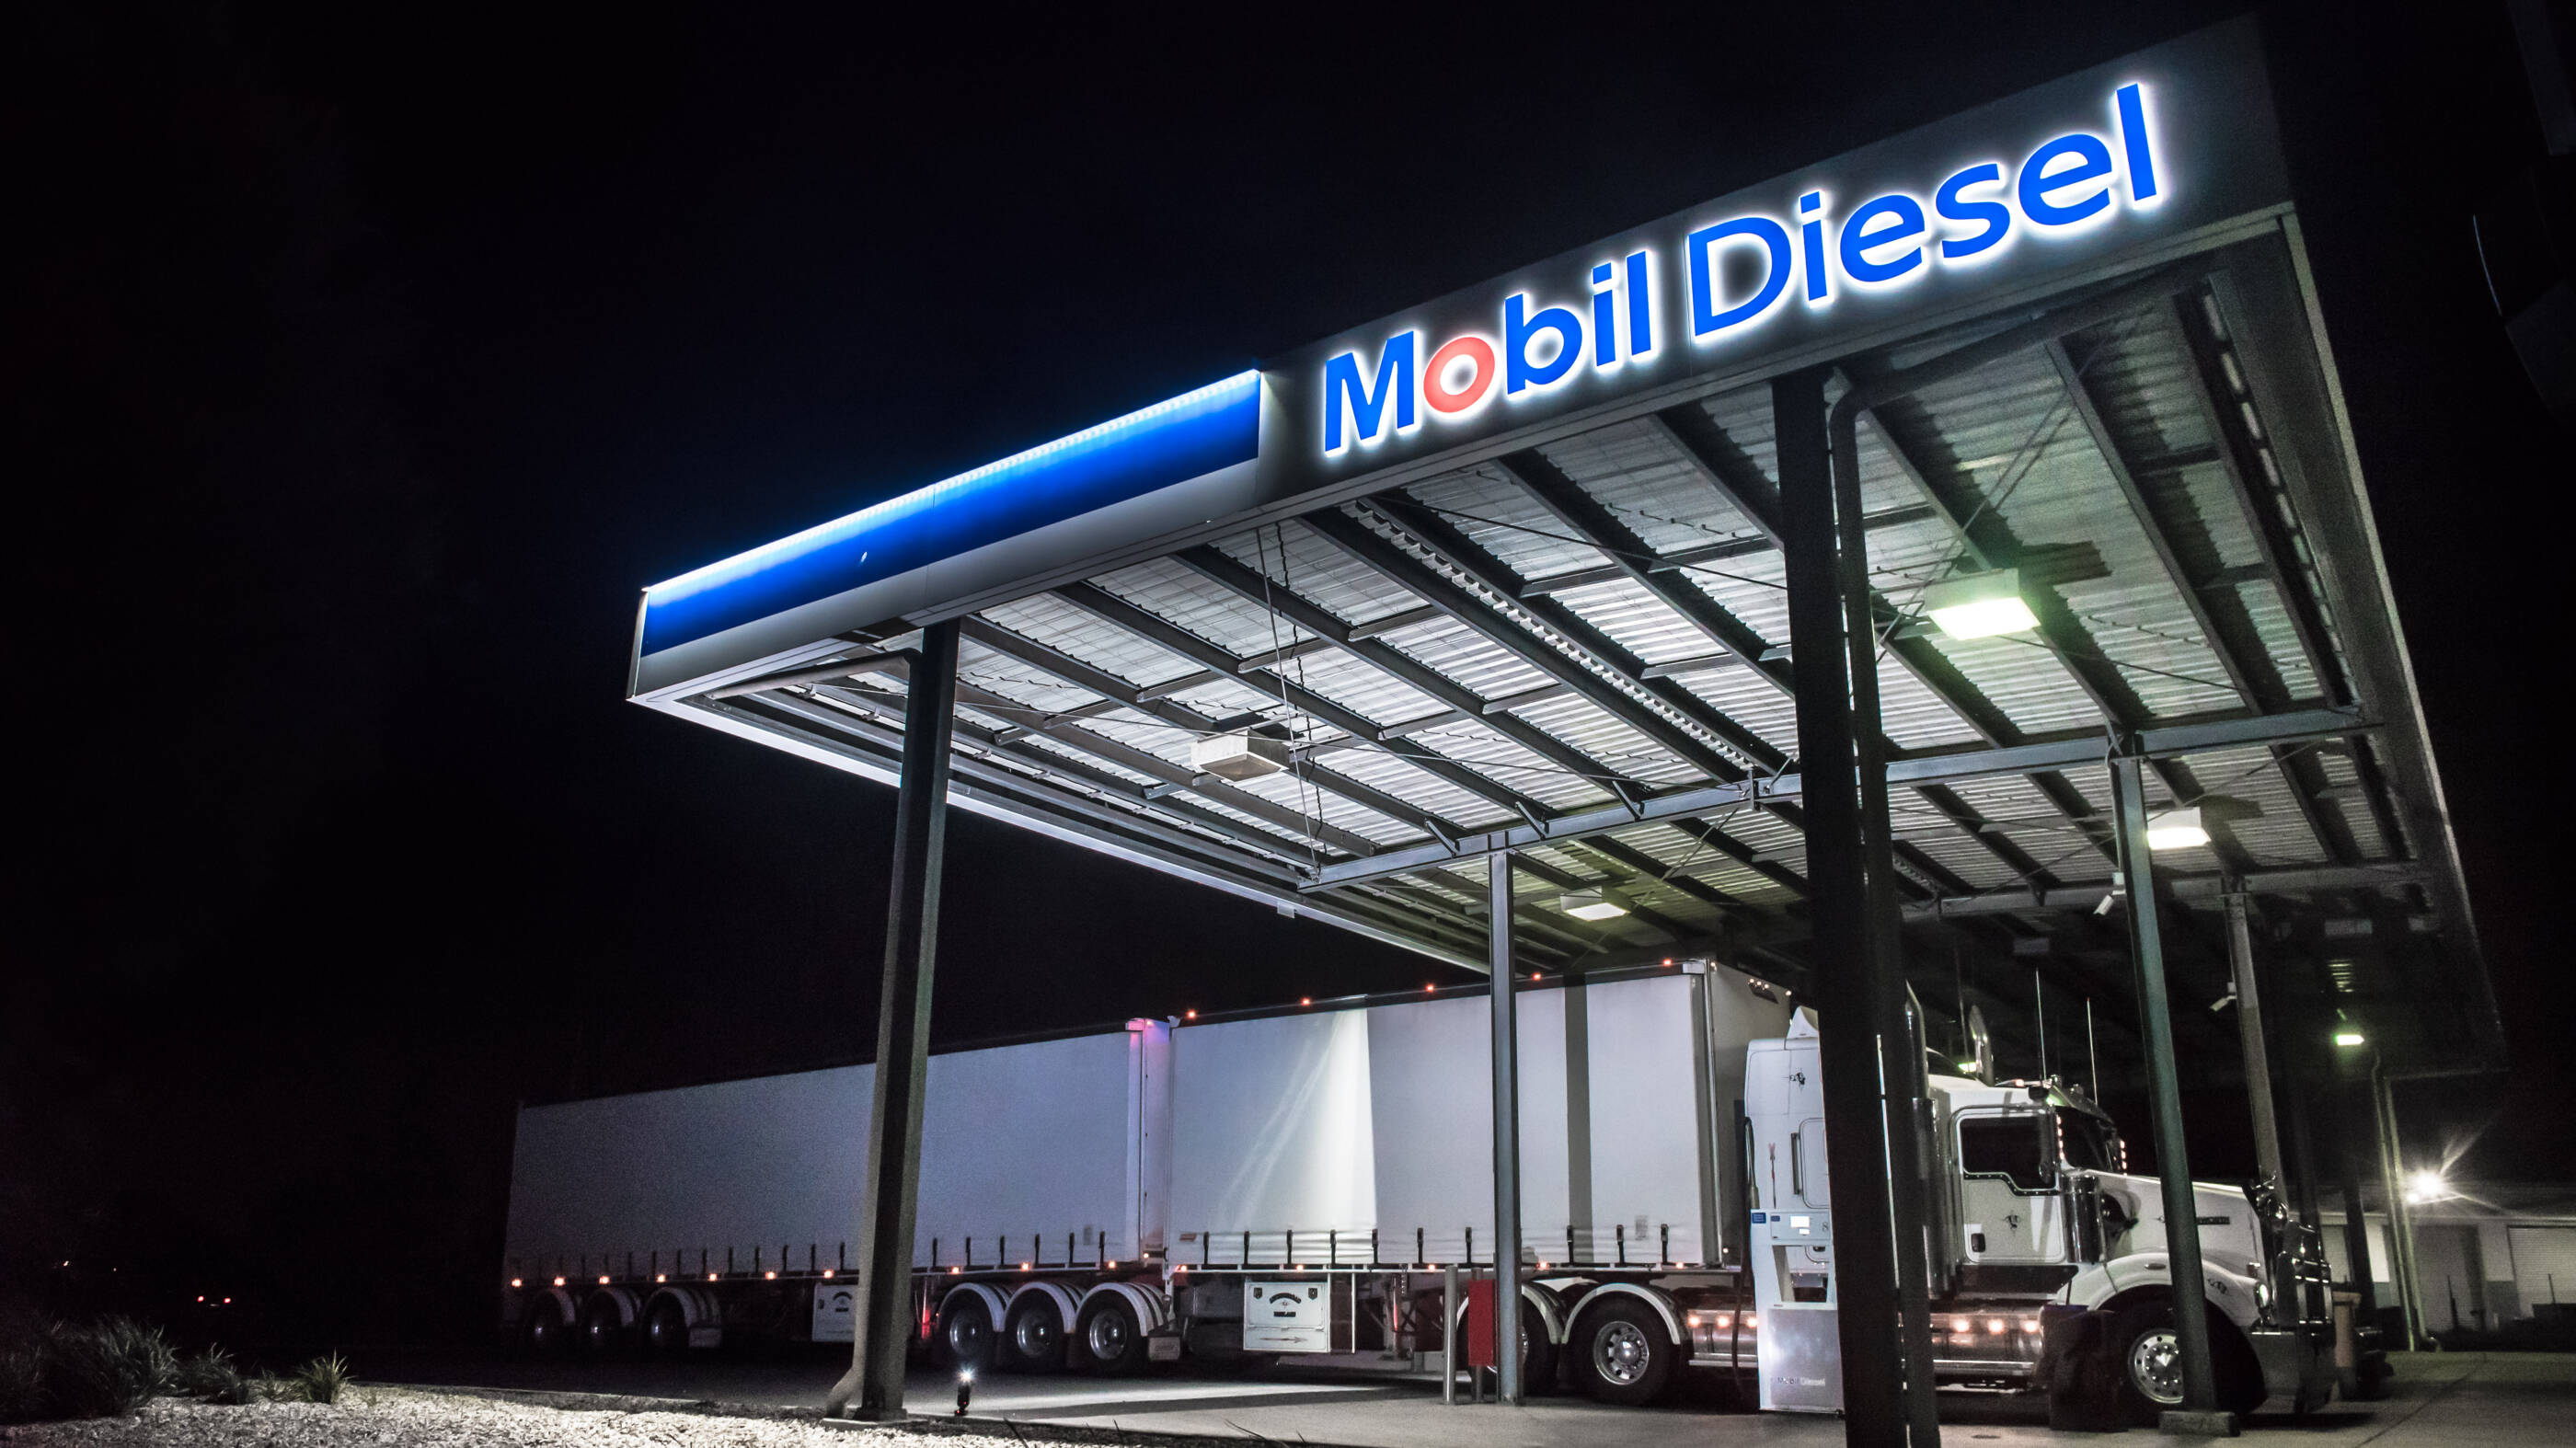 Image As we cease importing and processing crude oil and instead move to importing, storing and distributing refined fuel products, Mobil will proudly maintain our role as a key supplier of fuel to Victoria.